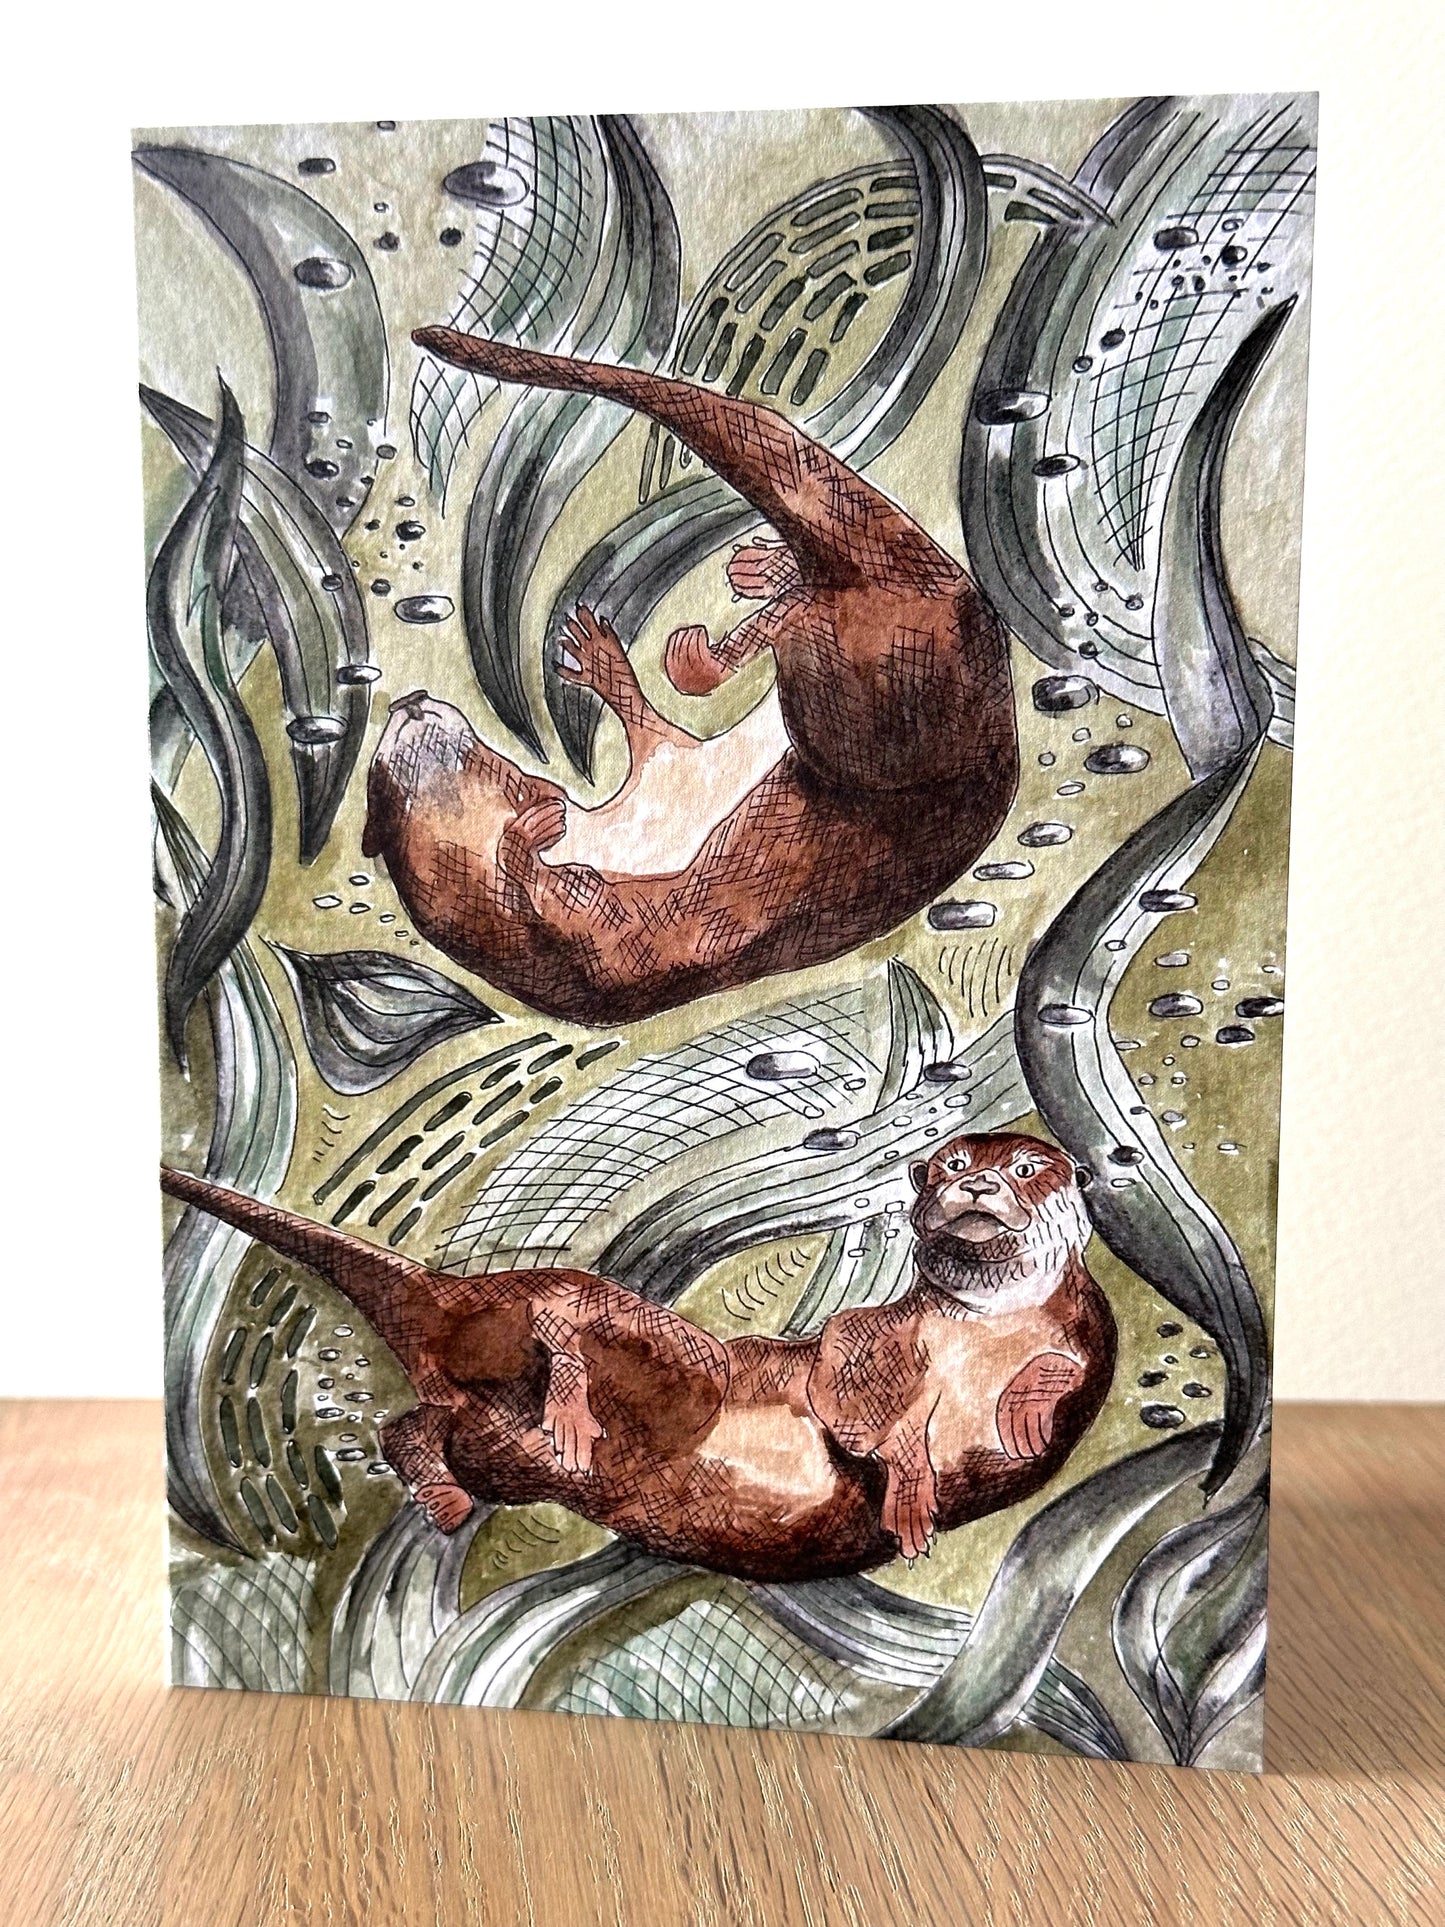 Greeting Card - contemporary card with otters